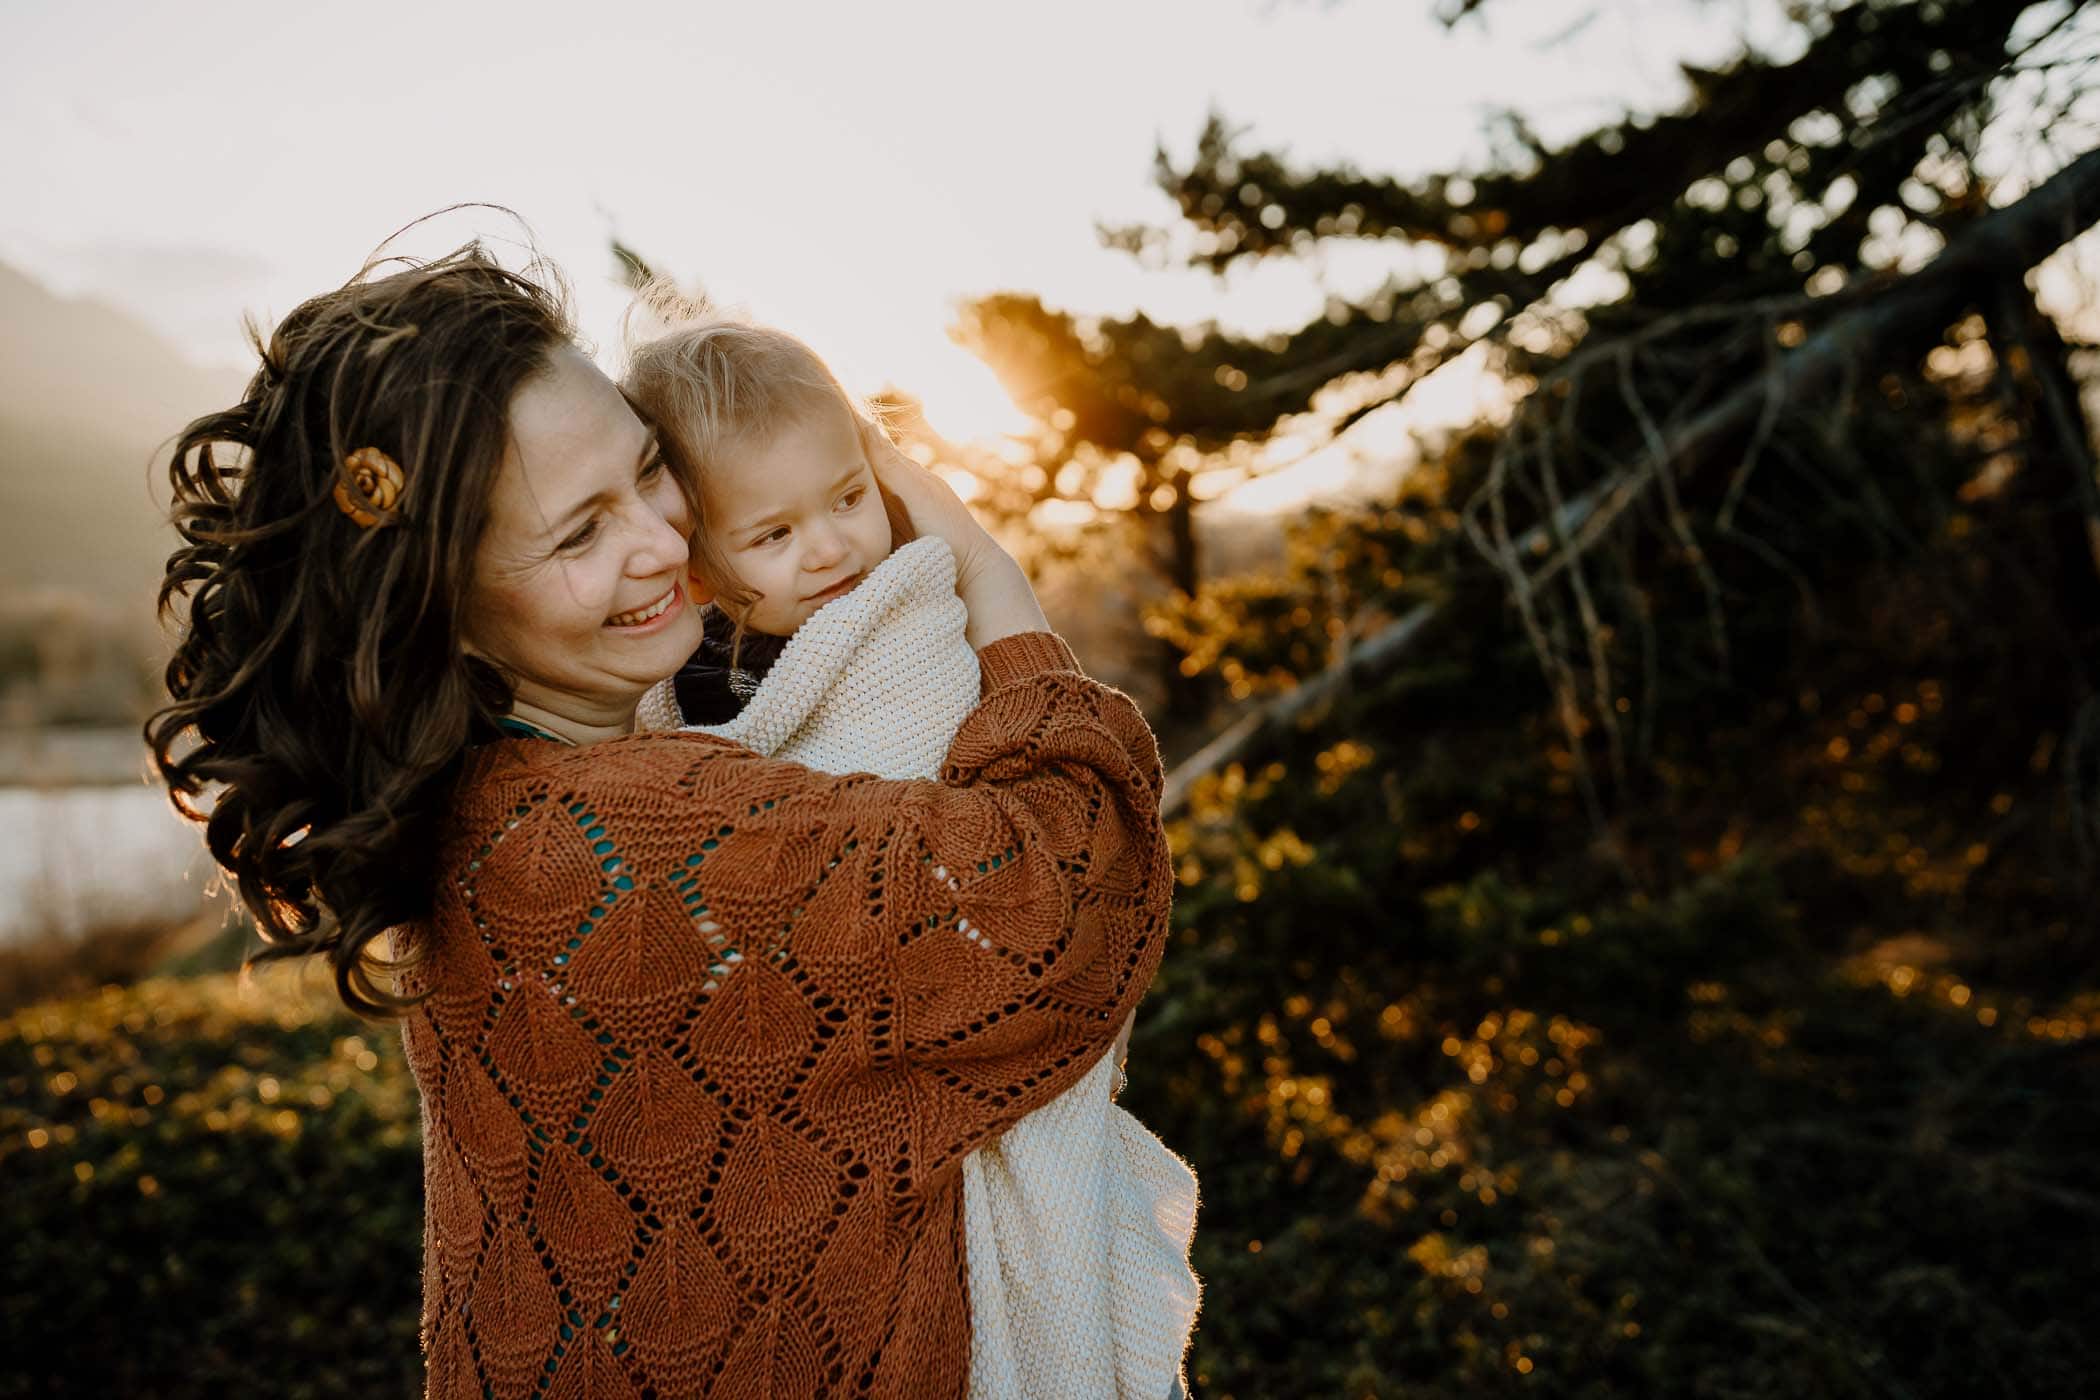 Mom in a brown cardigan holding toddler son with sunset behind - clubhouse app for family photographers